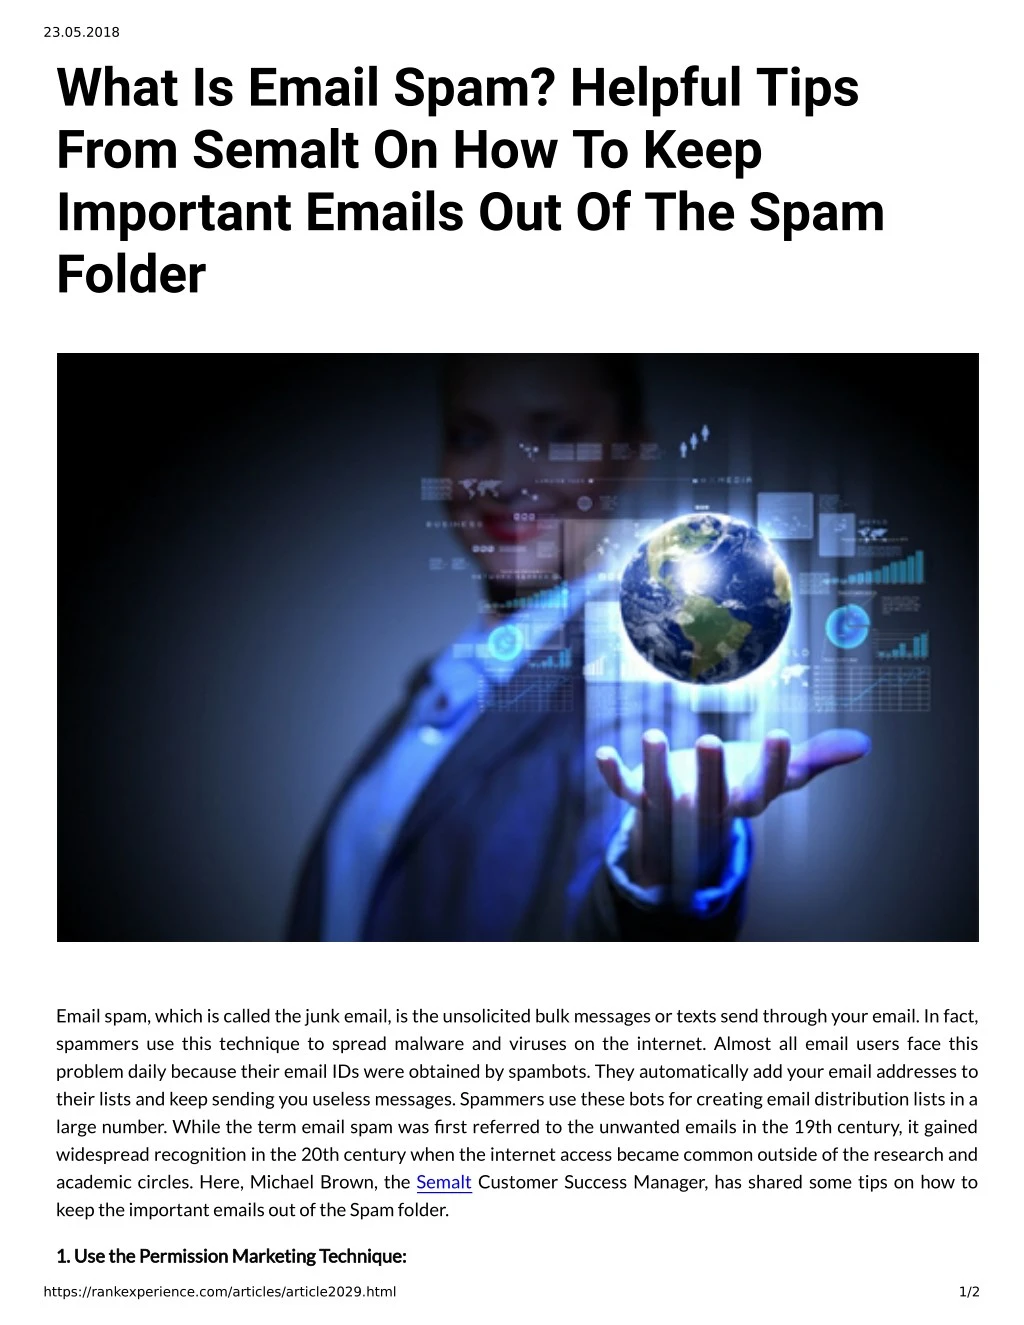 23 05 2018 what is email spam helpful tips from